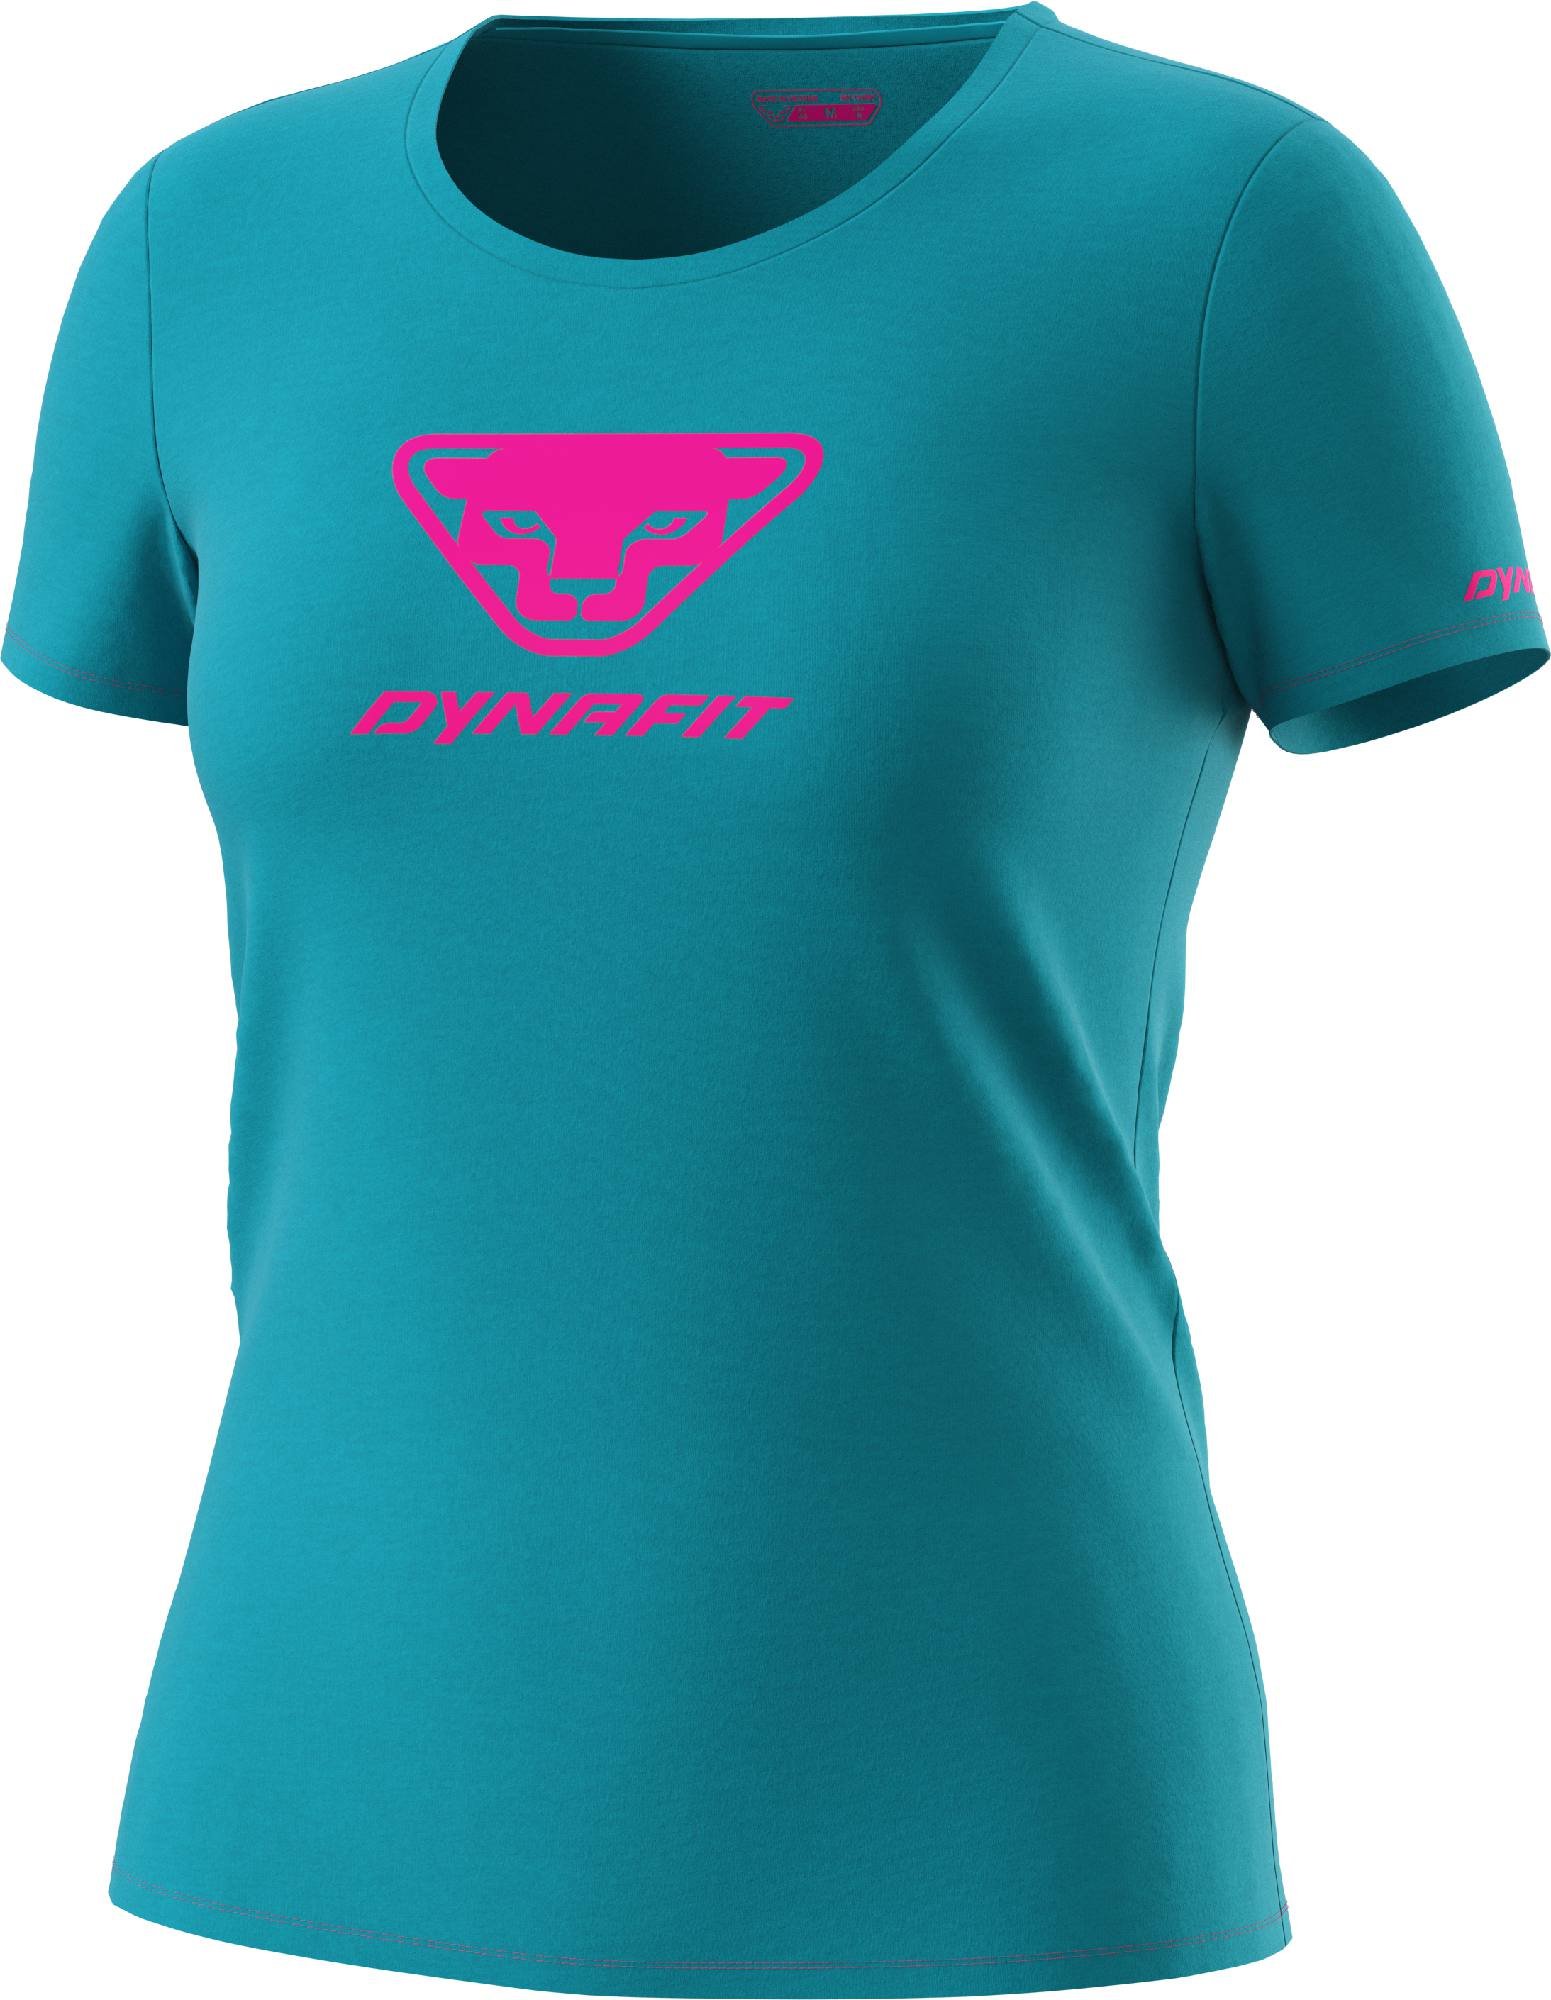 Dynafit PROMO W S/S Tee | Promo materiell